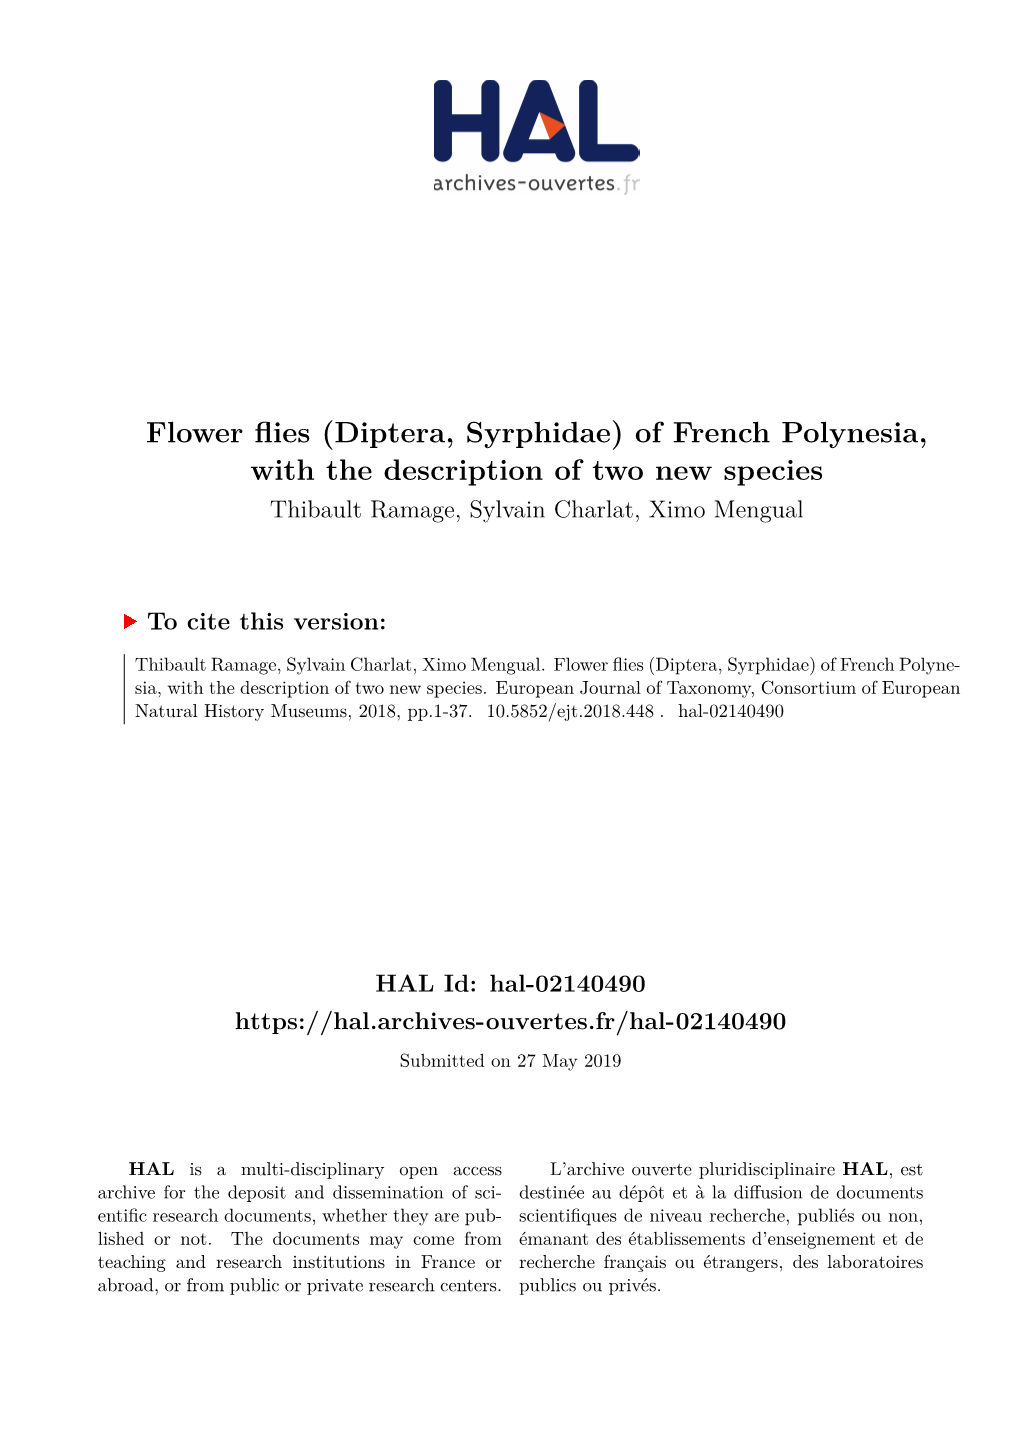 Diptera, Syrphidae) of French Polynesia, with the Description of Two New Species Thibault Ramage, Sylvain Charlat, Ximo Mengual